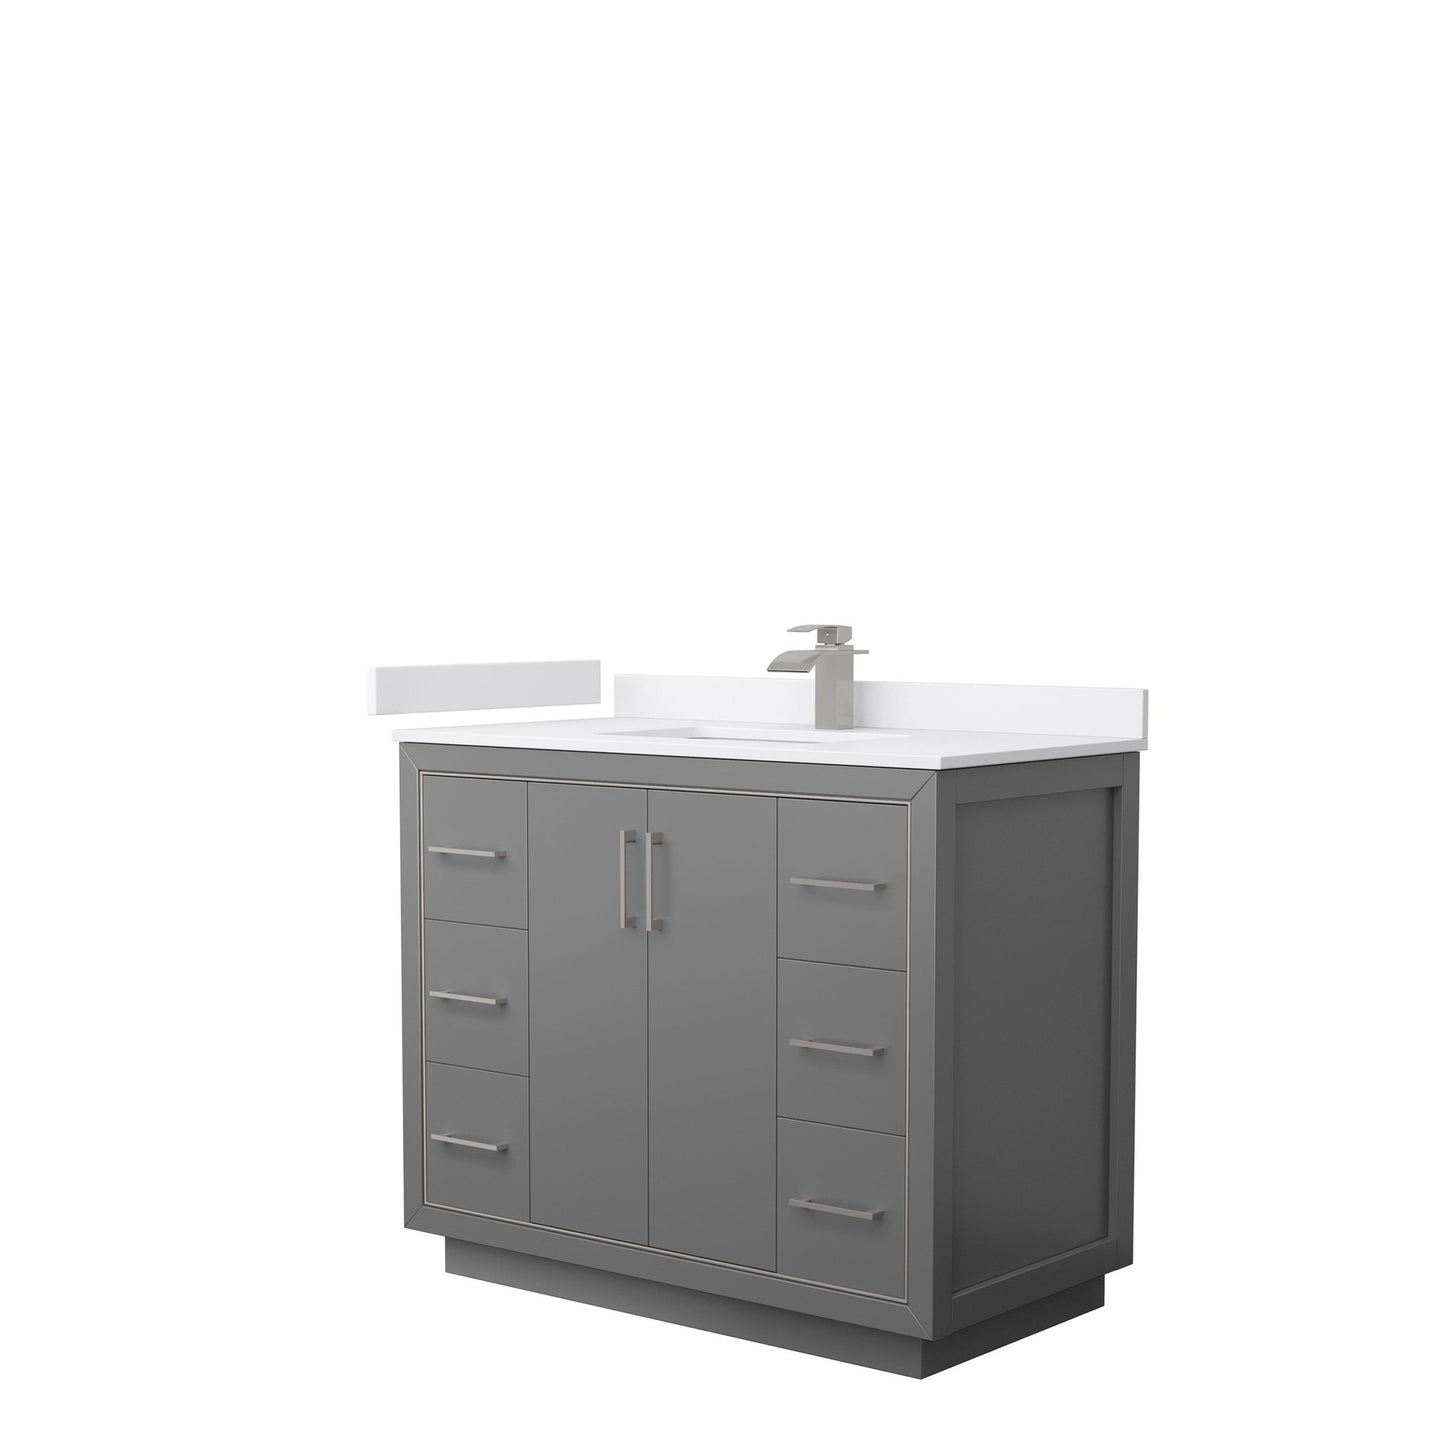 Wyndham Collection Icon 42" Single Bathroom Vanity in Dark Gray, White Cultured Marble Countertop, Undermount Square Sink, Brushed Nickel Trim